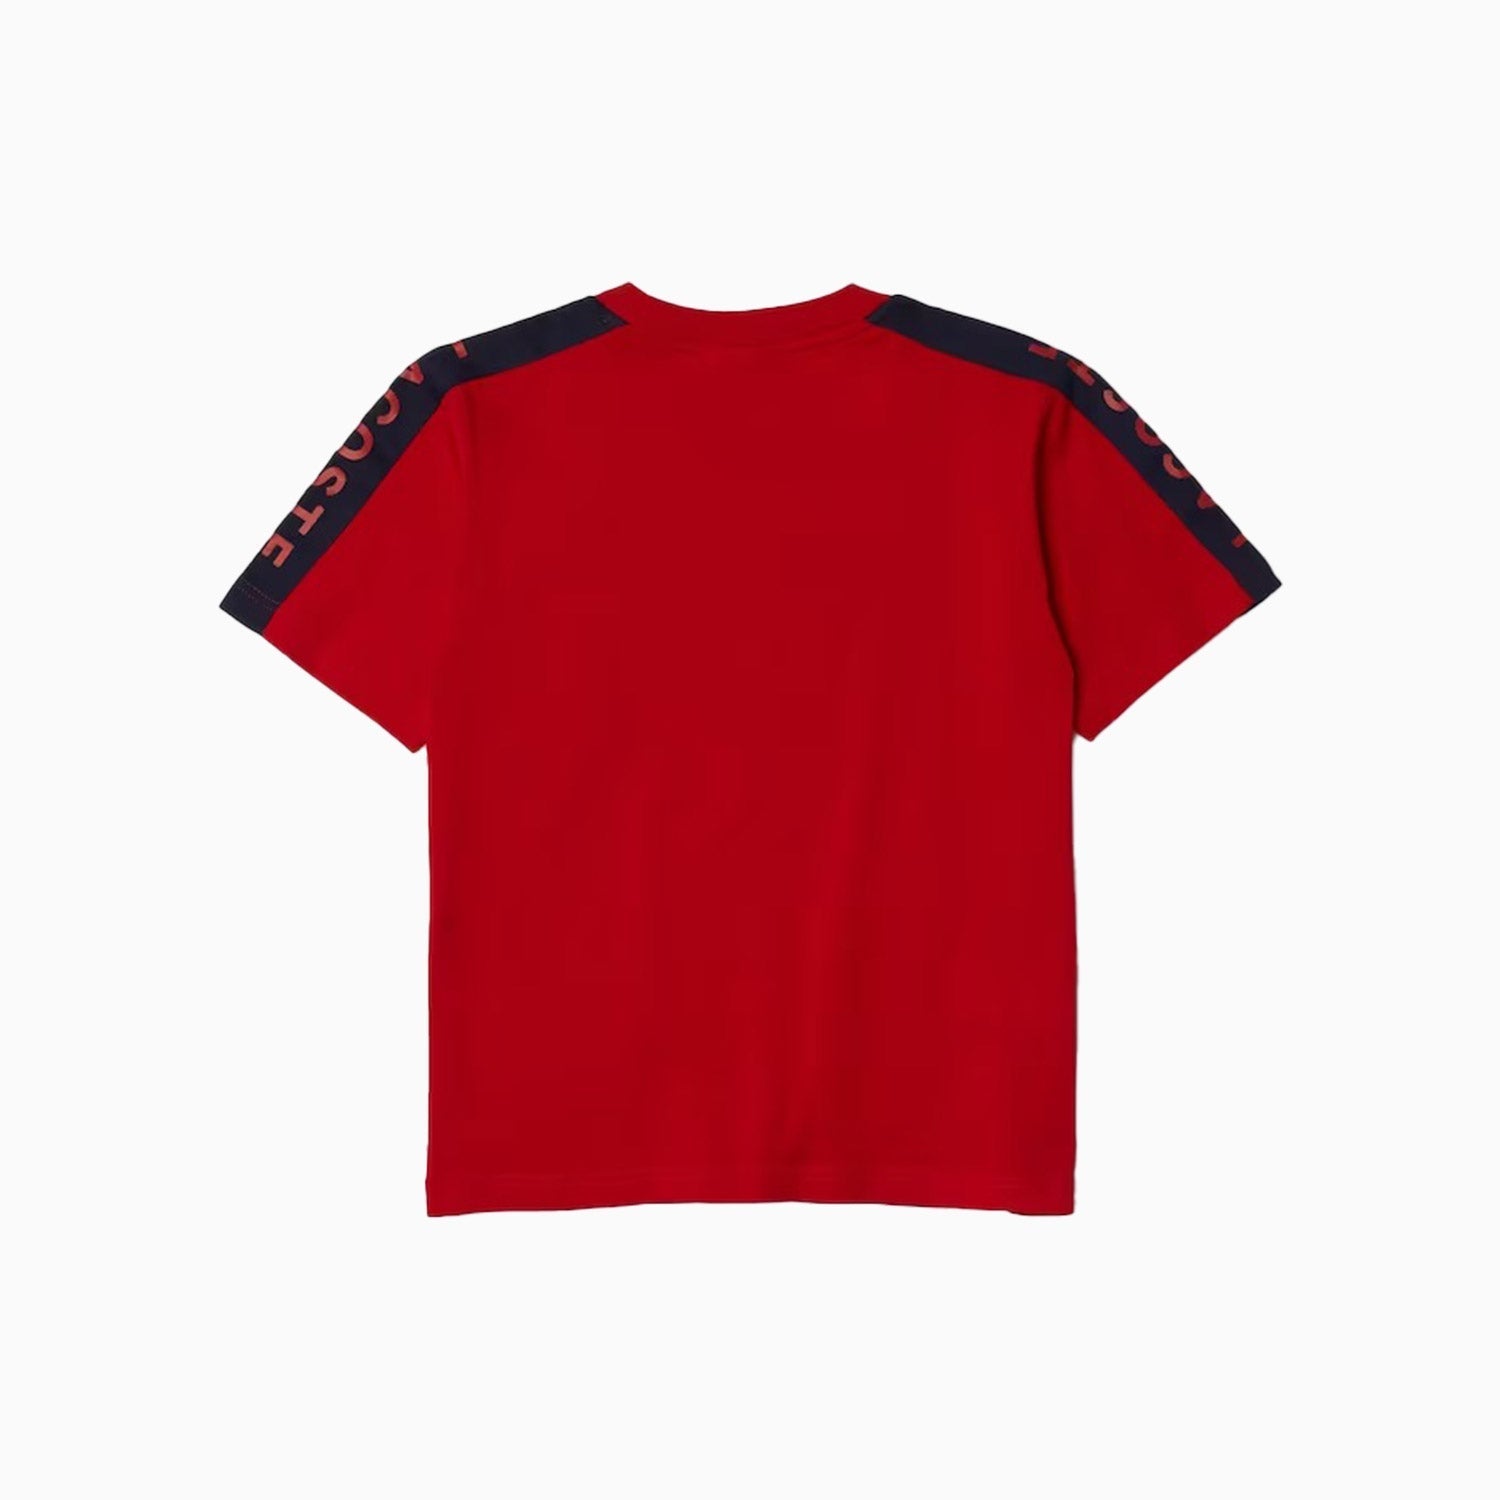 Lacoste Kid's Crew Neck Lettered Bands T Shirt - Color: Infra Red Navy Blue - Kids Premium Clothing -